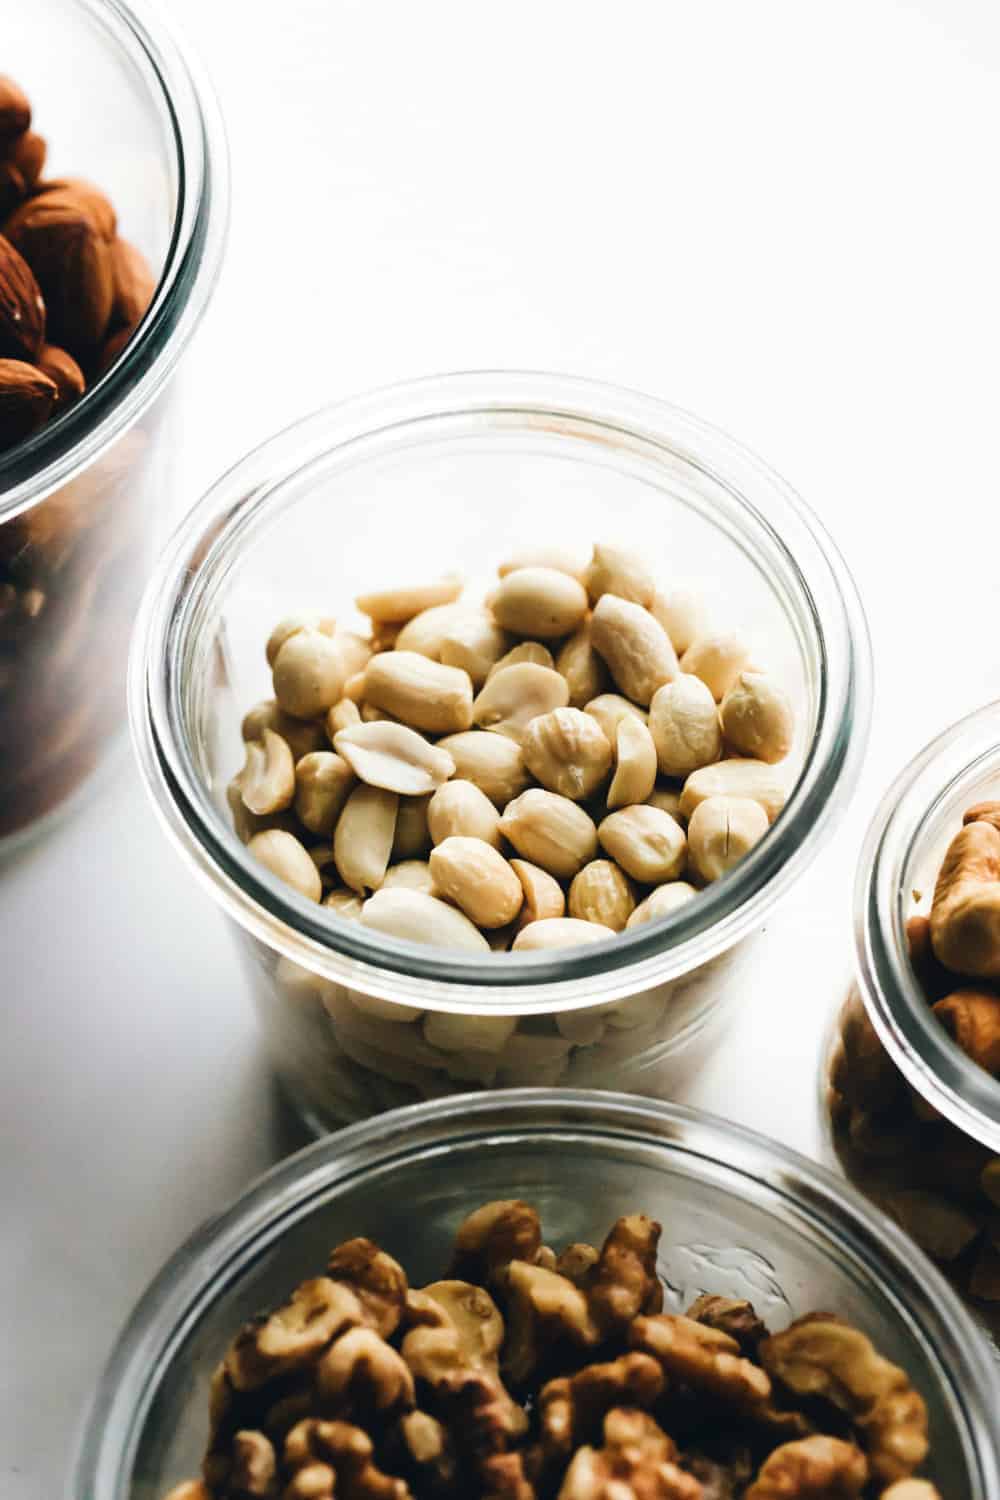 Toasted, skinned peanuts in a glass jar